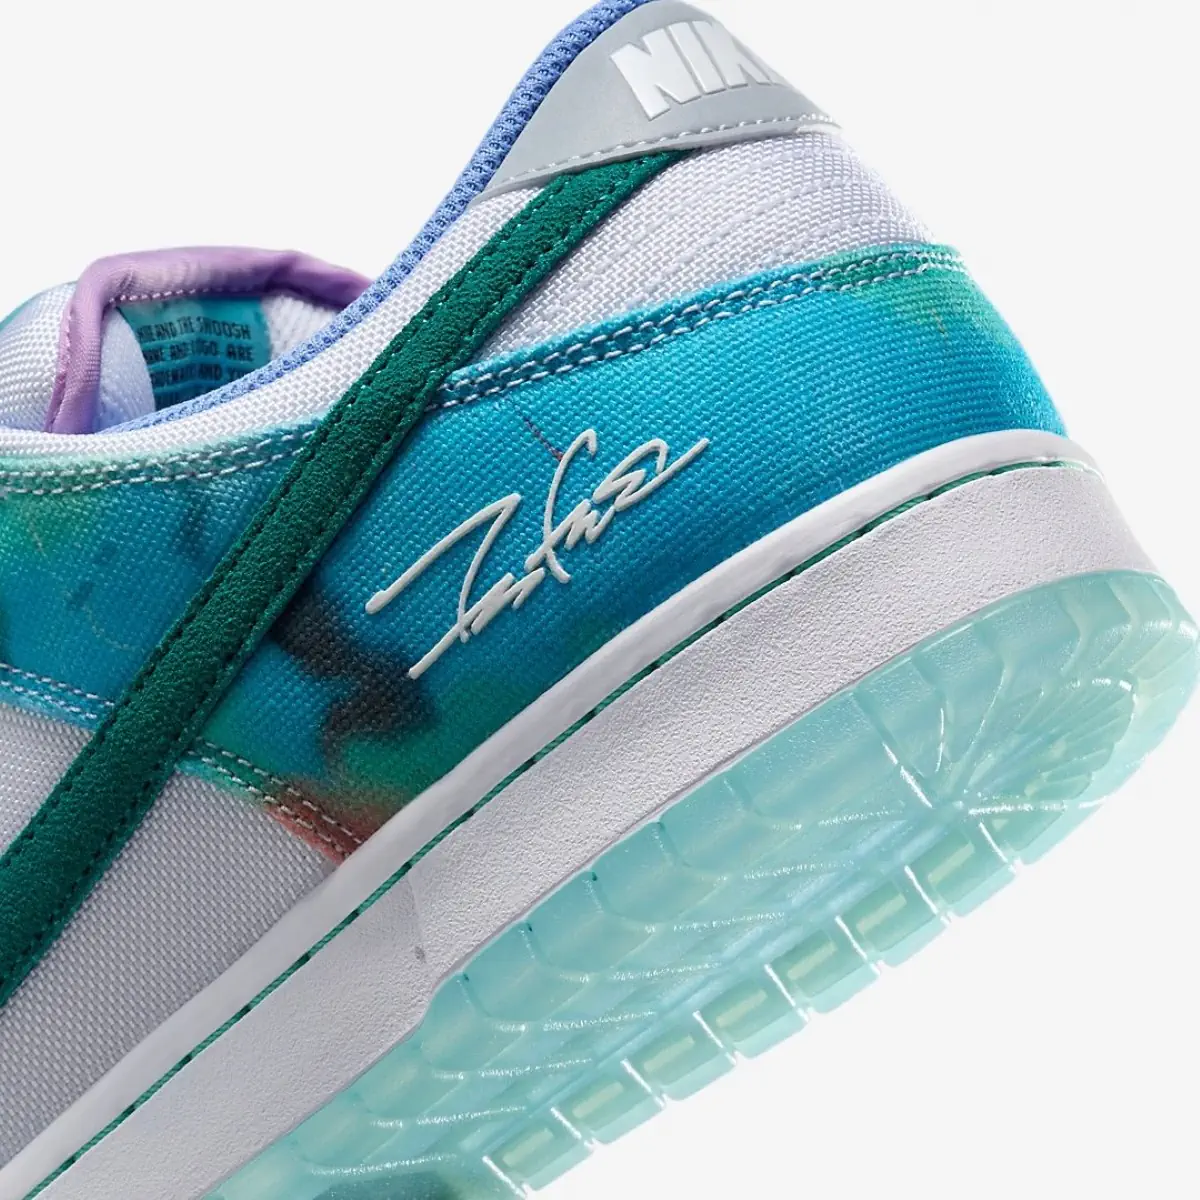 Nike SB Dunk Low Futura Unleashes Unbridled Creativity in Two Vibrant Colorways